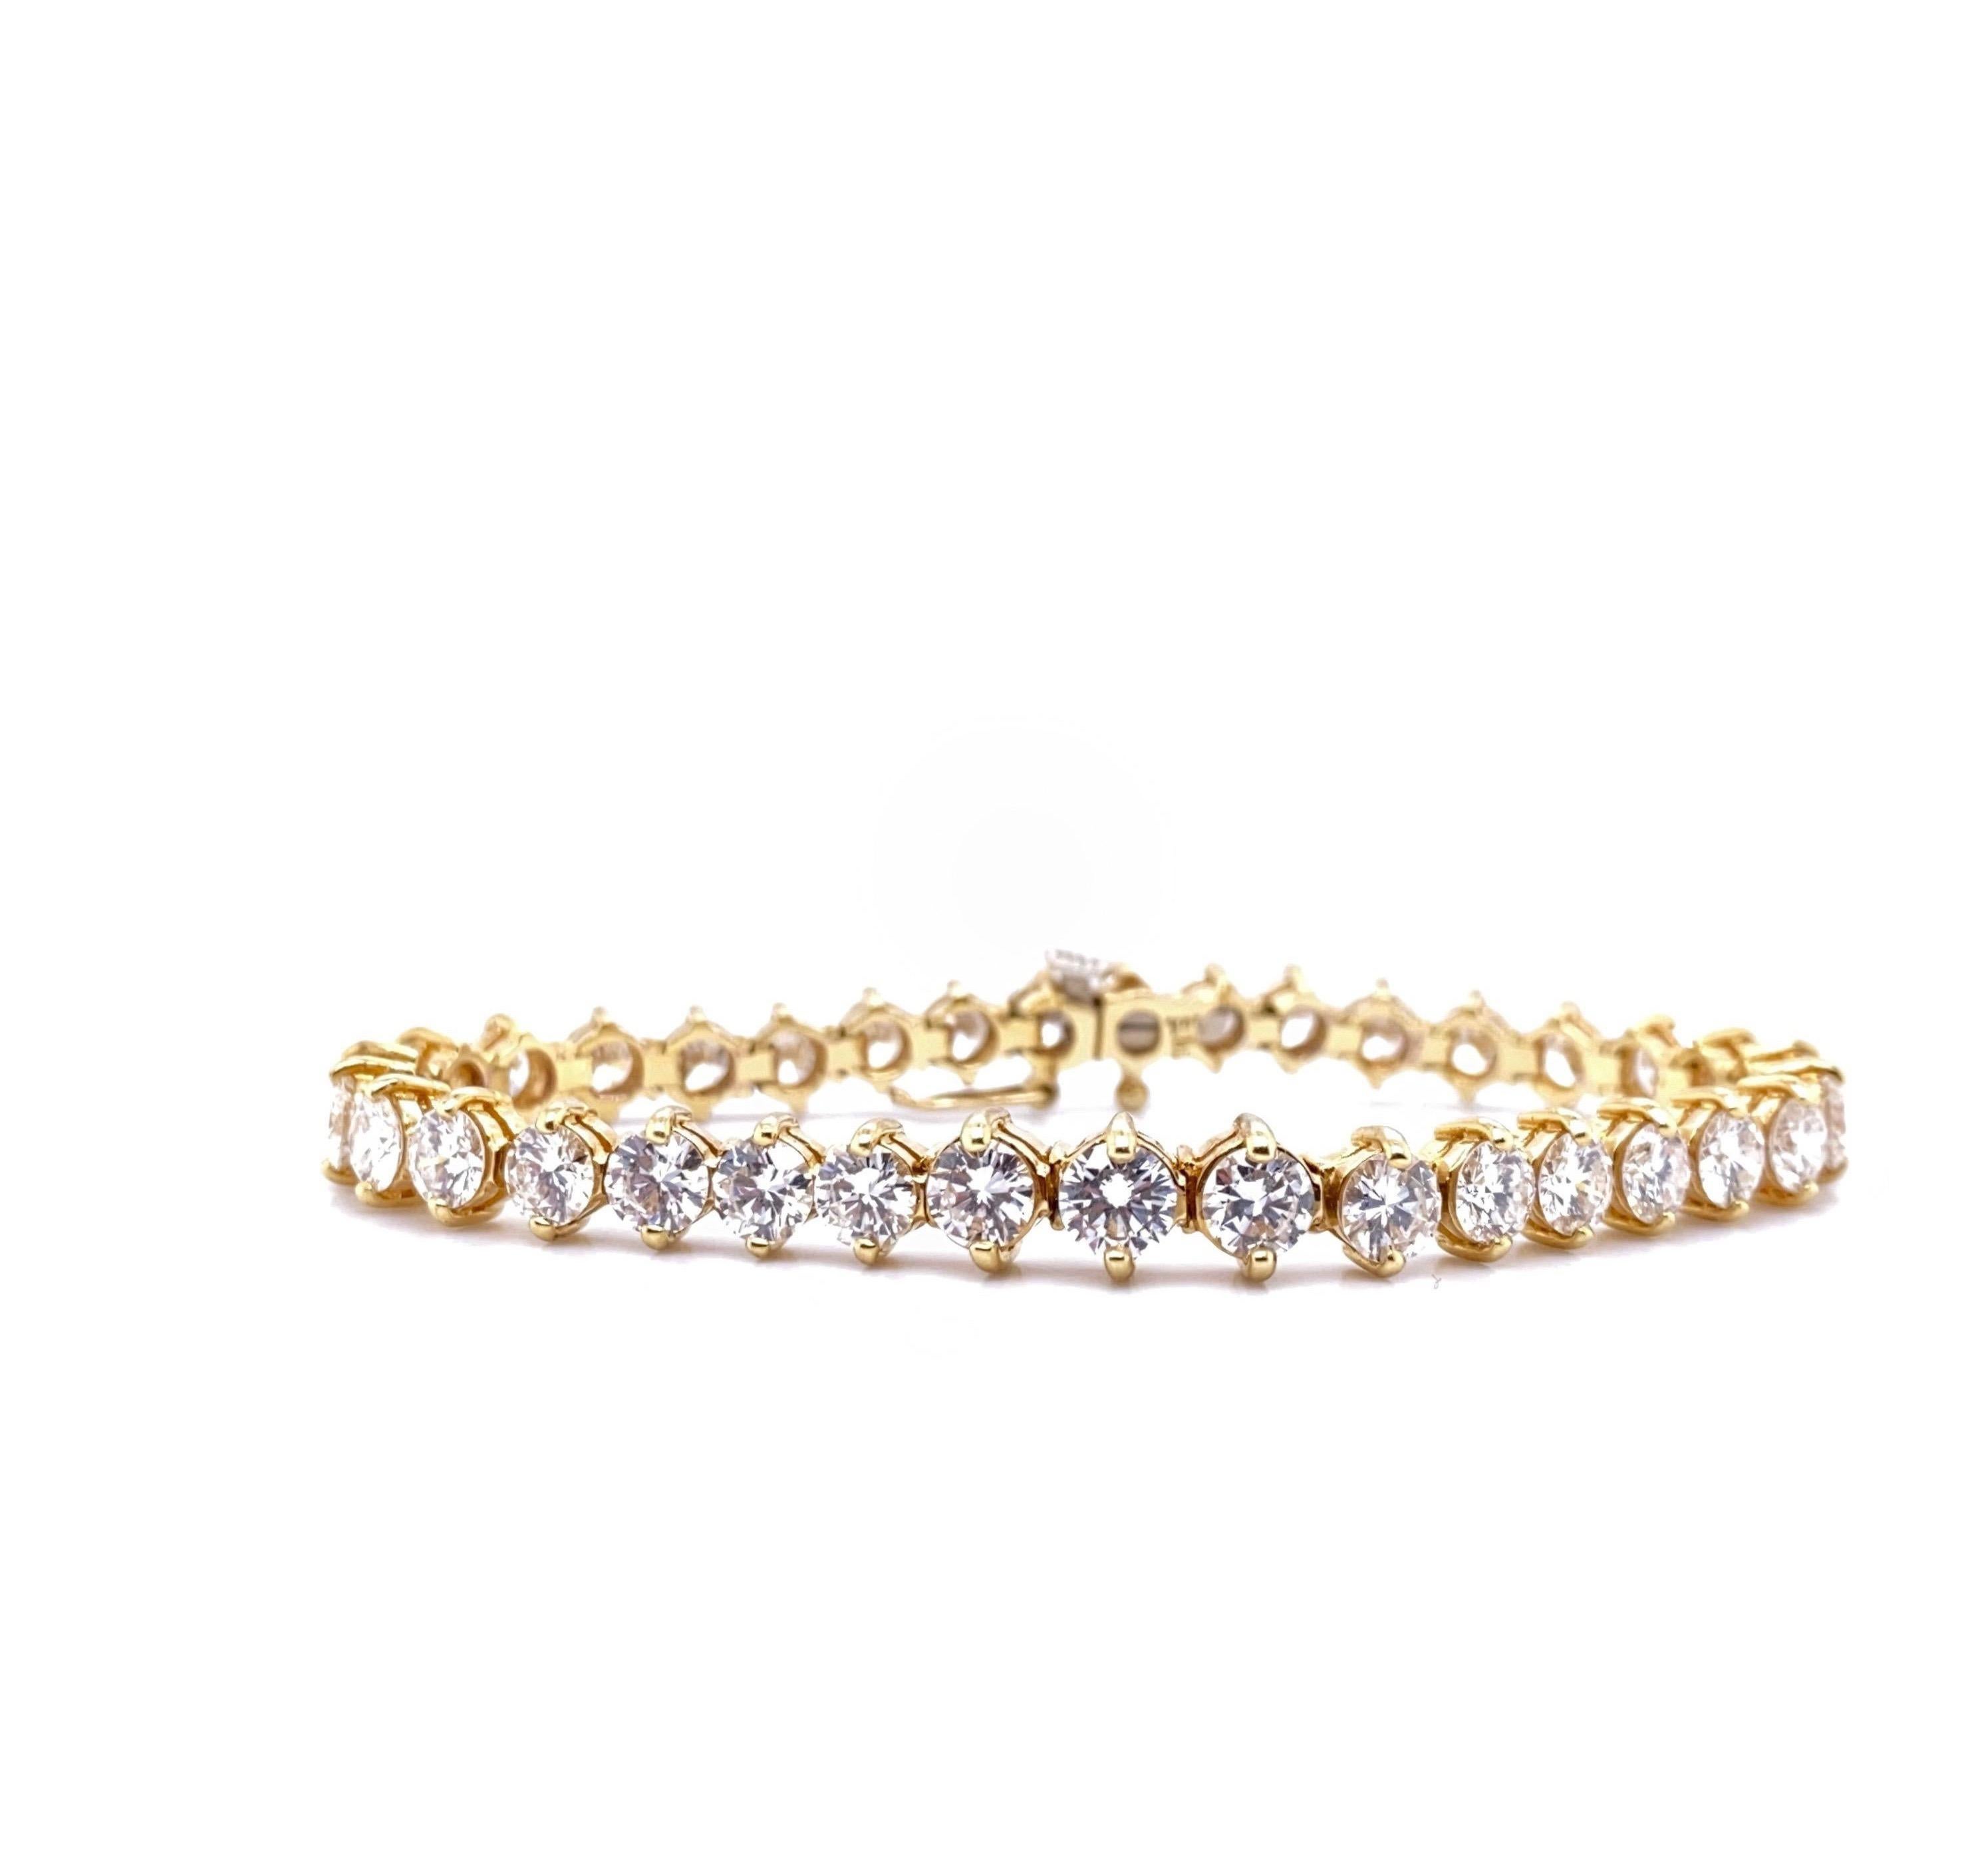 Approximately 11 Carats of magnificent perfectly cut diamonds in D-F color vvs - vs clarity.
Set in 18k gold. This delicate bracelet features remarkable craftsmanship evident in the setting of the stones